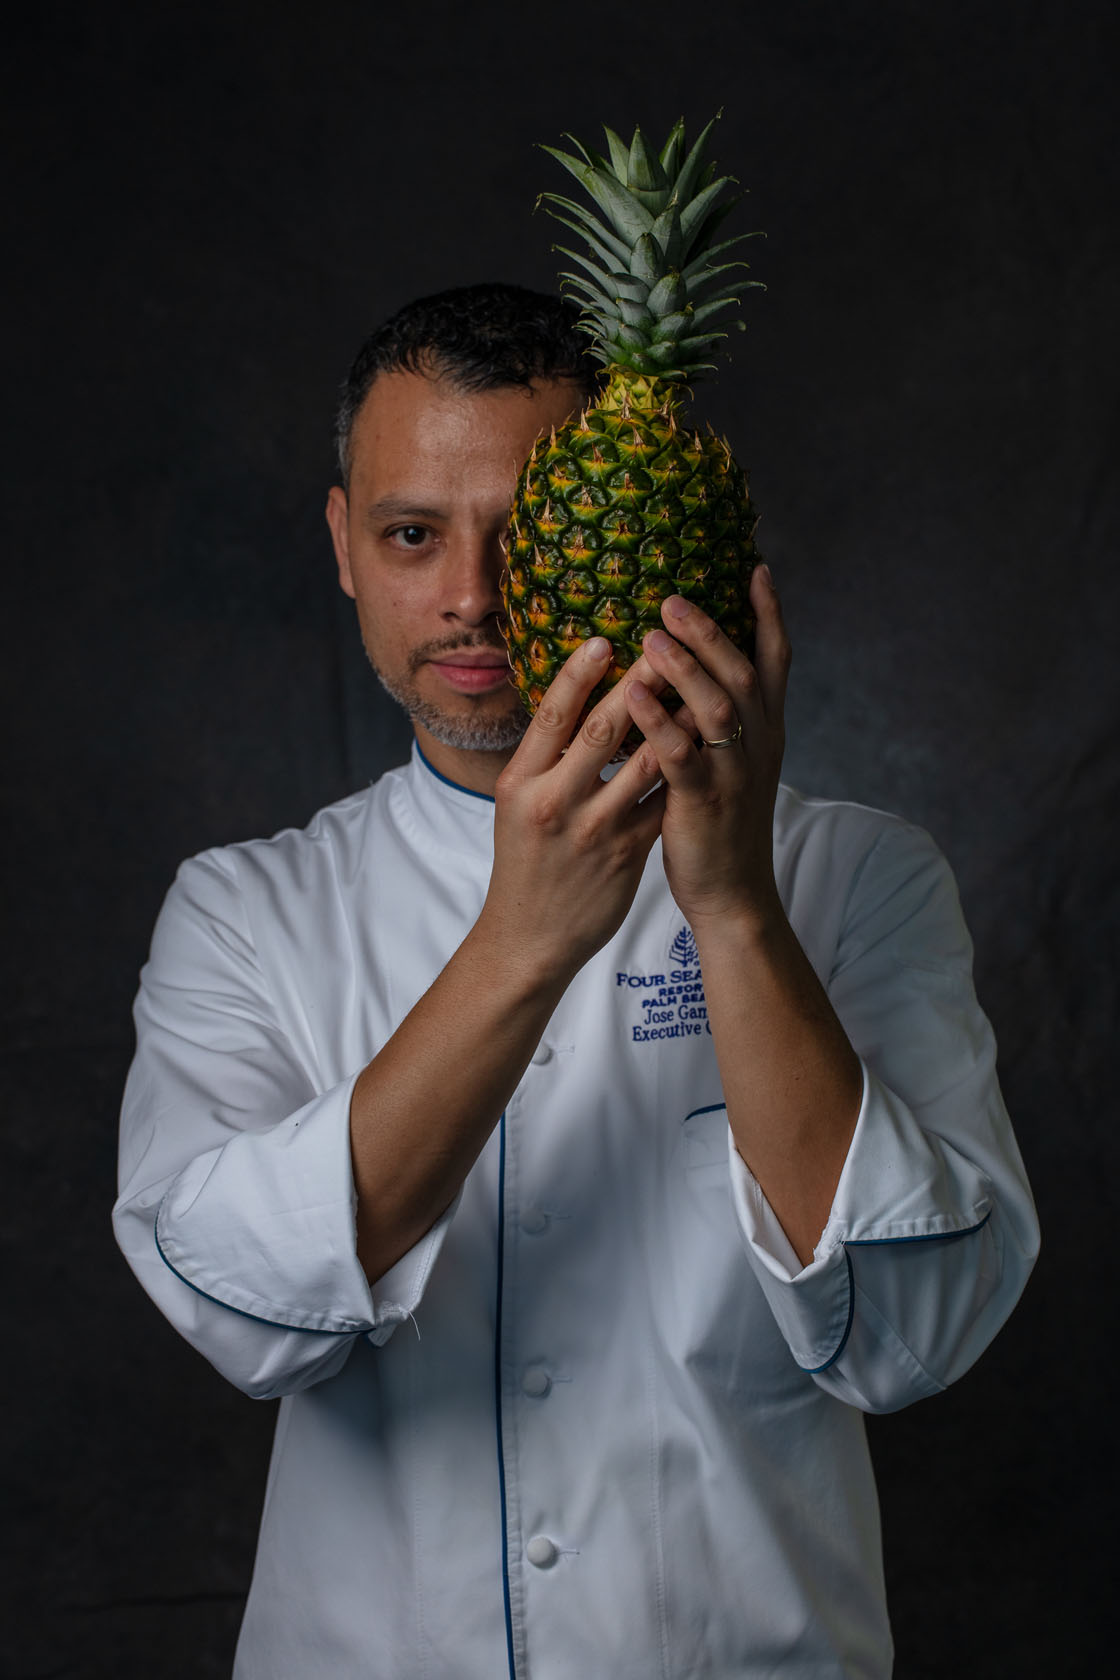 Chef at Four Seasons holds a pineapple up to his head